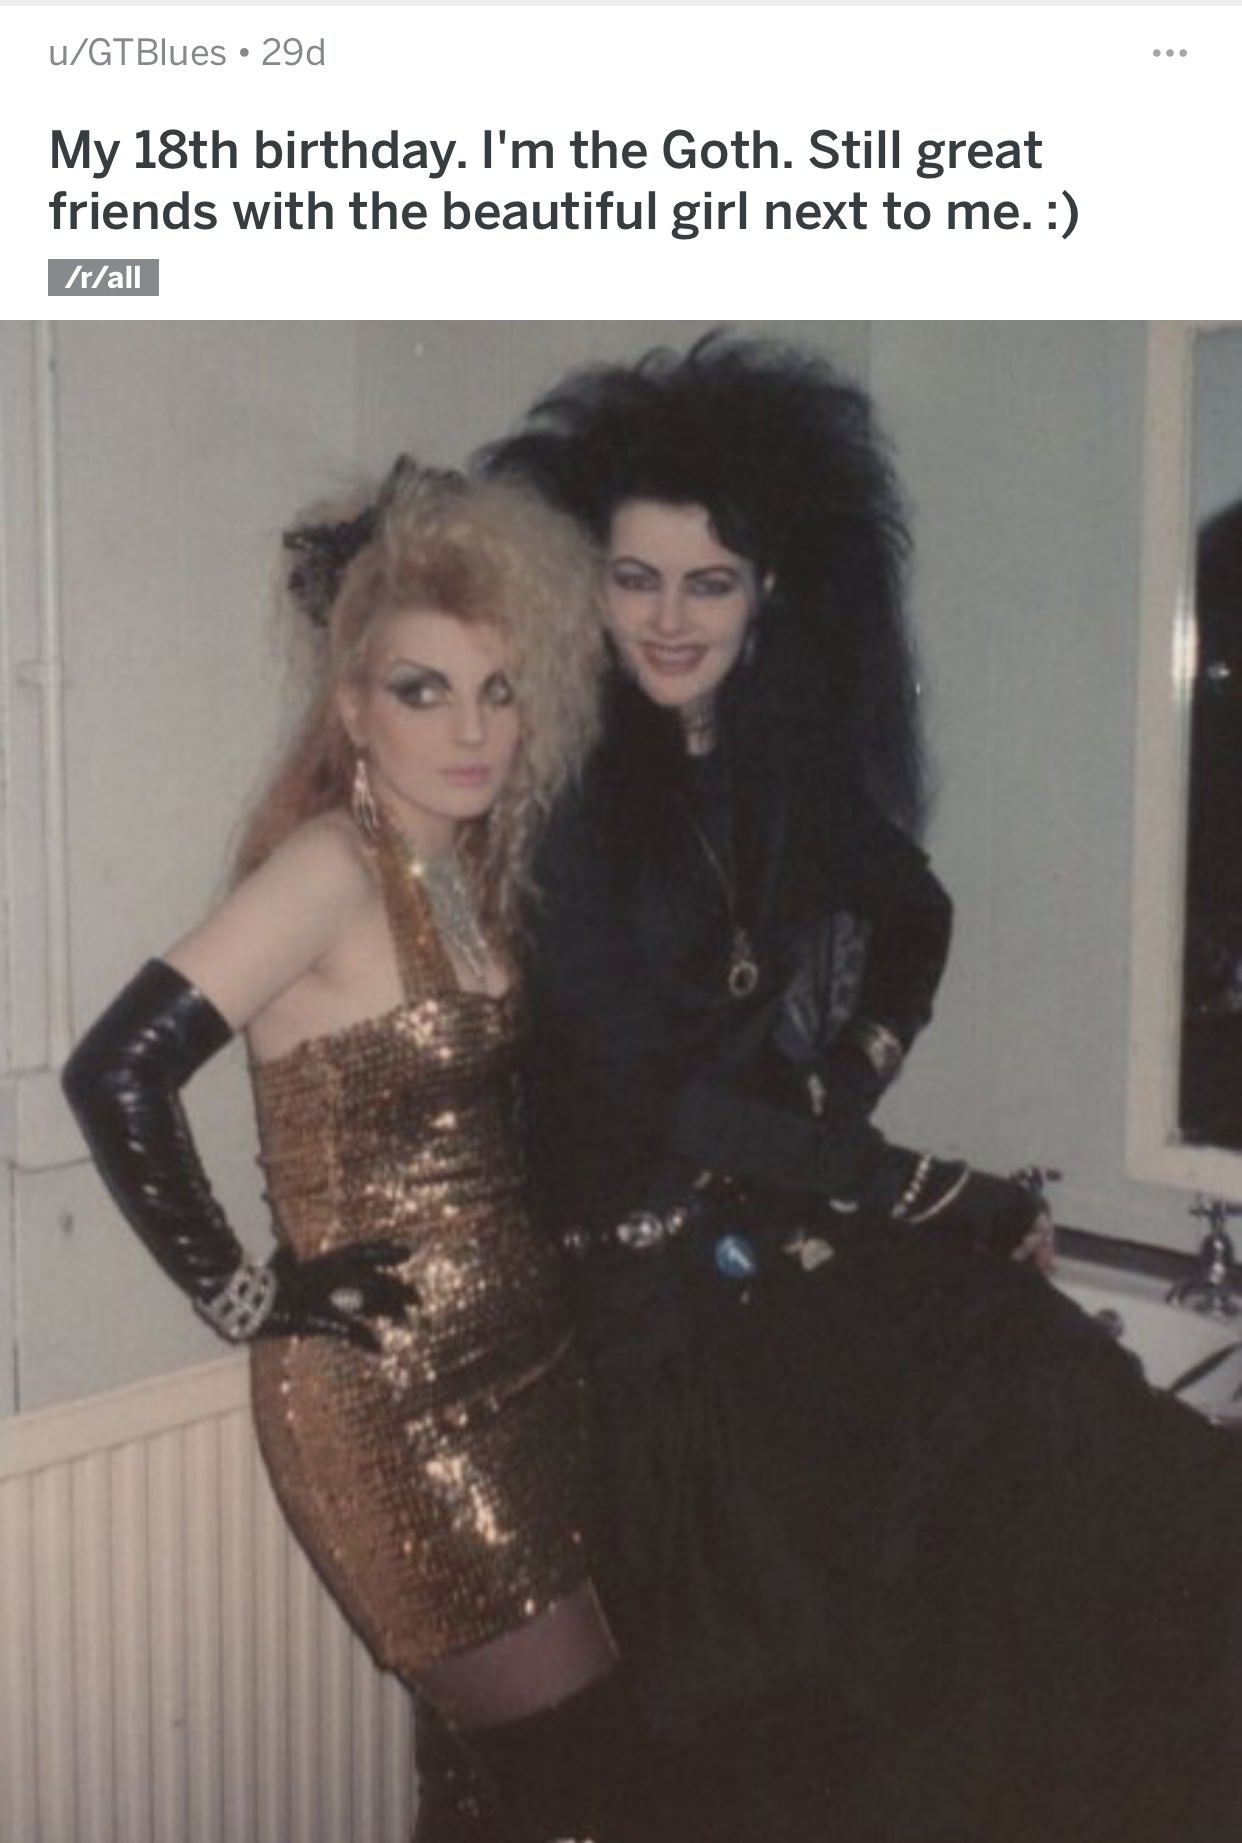 black hair - uGTBlues 29d My 18th birthday. I'm the Goth. Still great friends with the beautiful girl next to me. rall